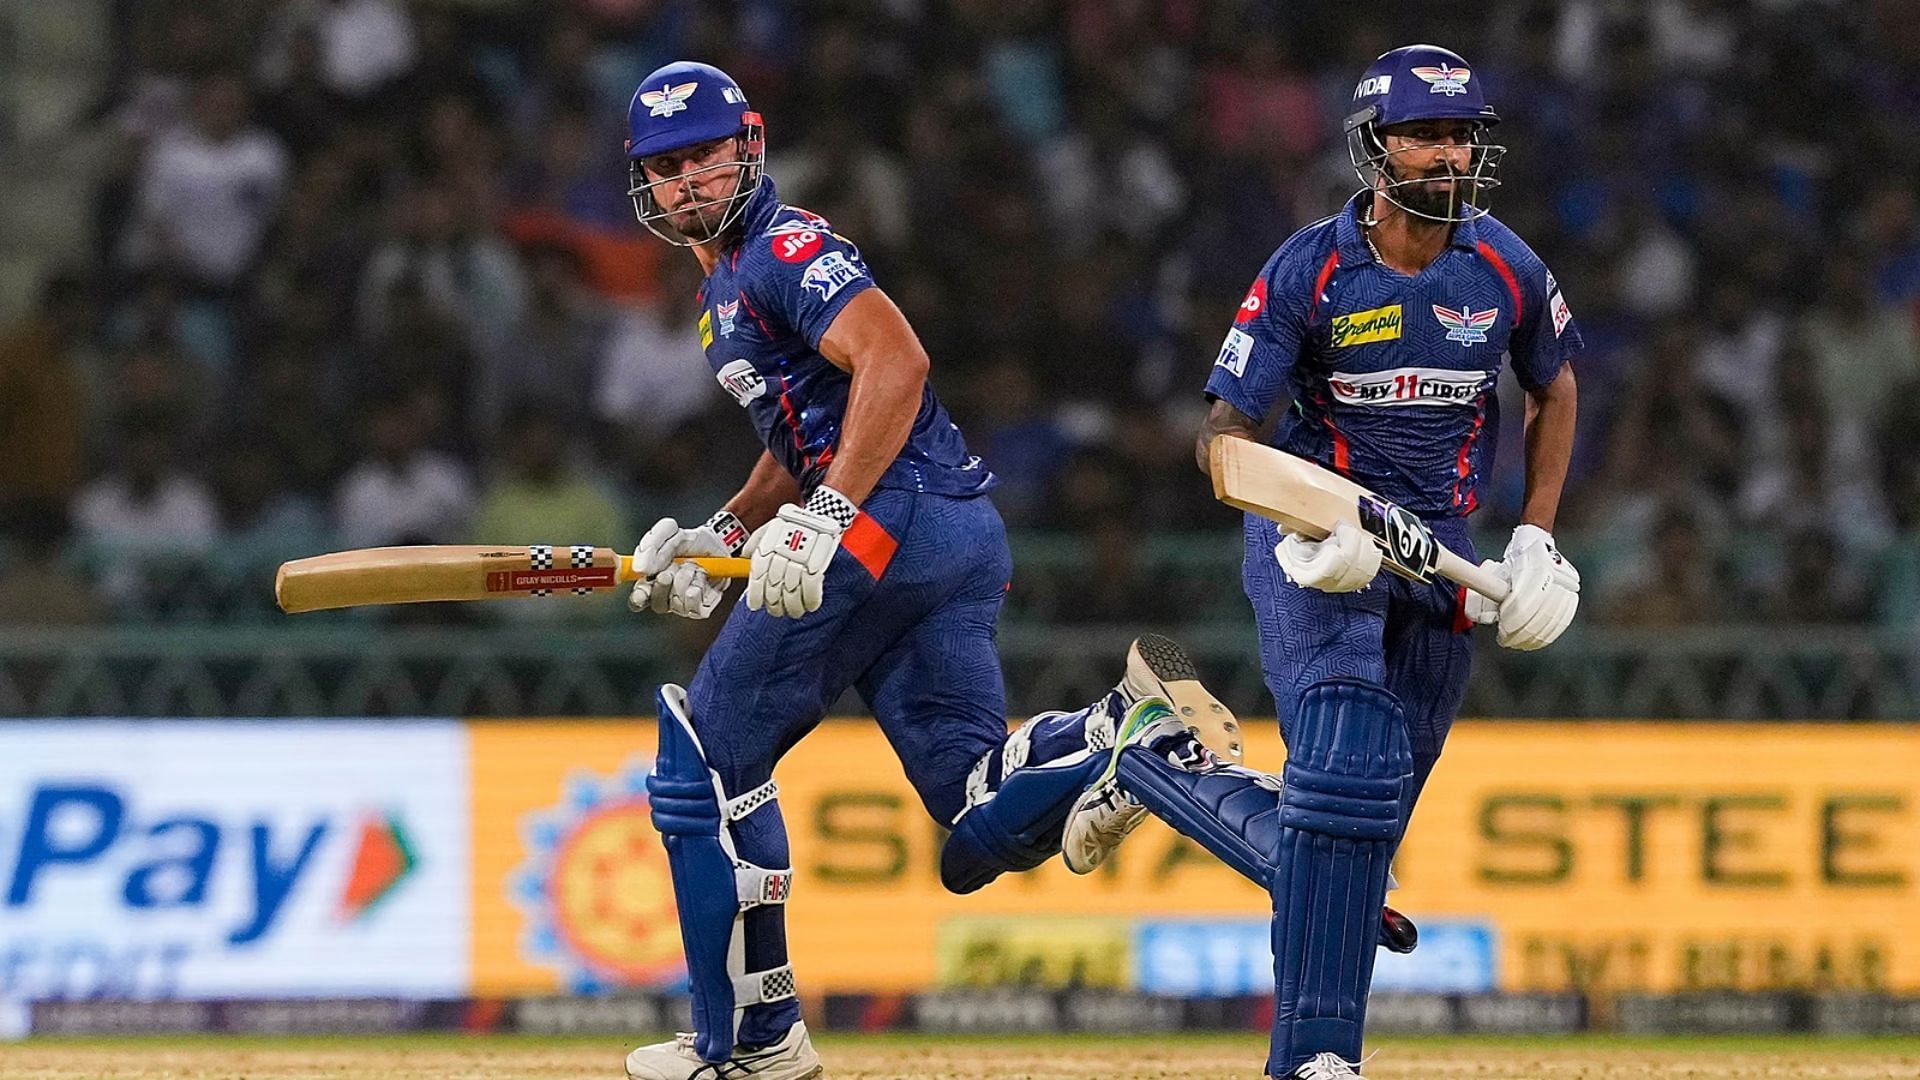 Can Marcus Stoinis and Krunal Pandya guide LSG to victory over MI once again?